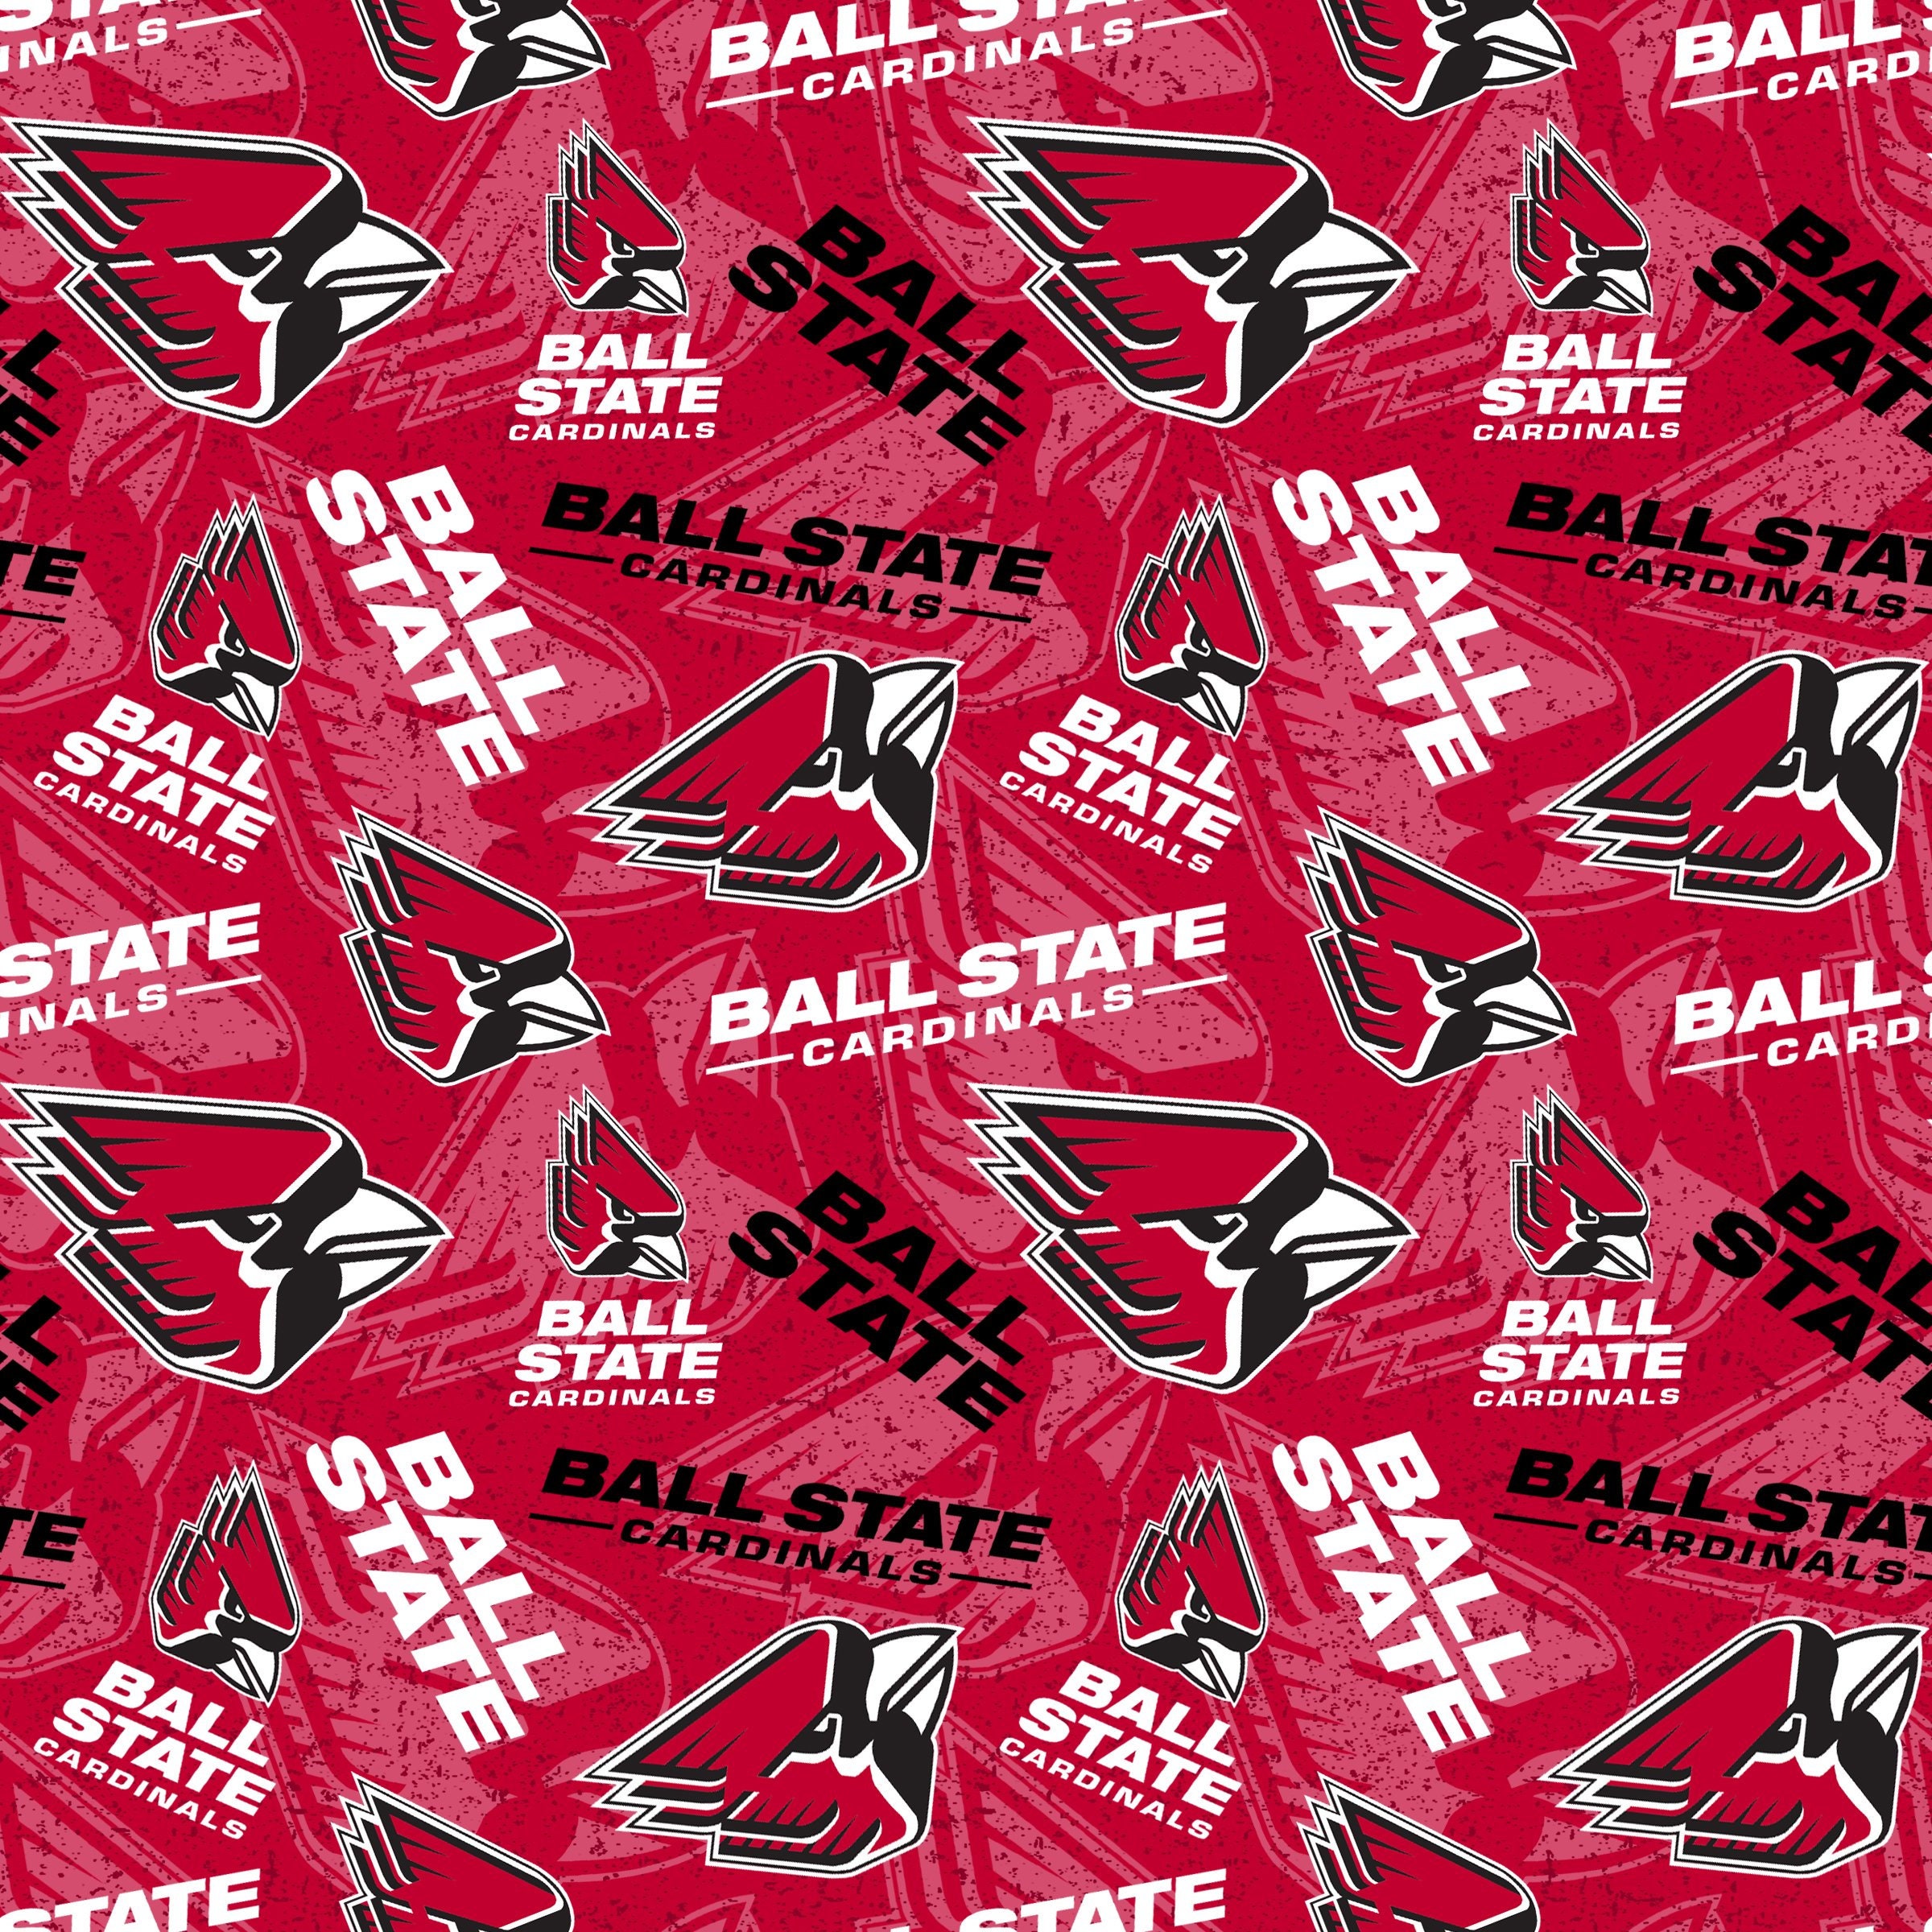  SYKEL ENTRPRISES University of Louisville Cardinals Cotton  Fabric, Red & Black - Sold by The Yard : Arts, Crafts & Sewing